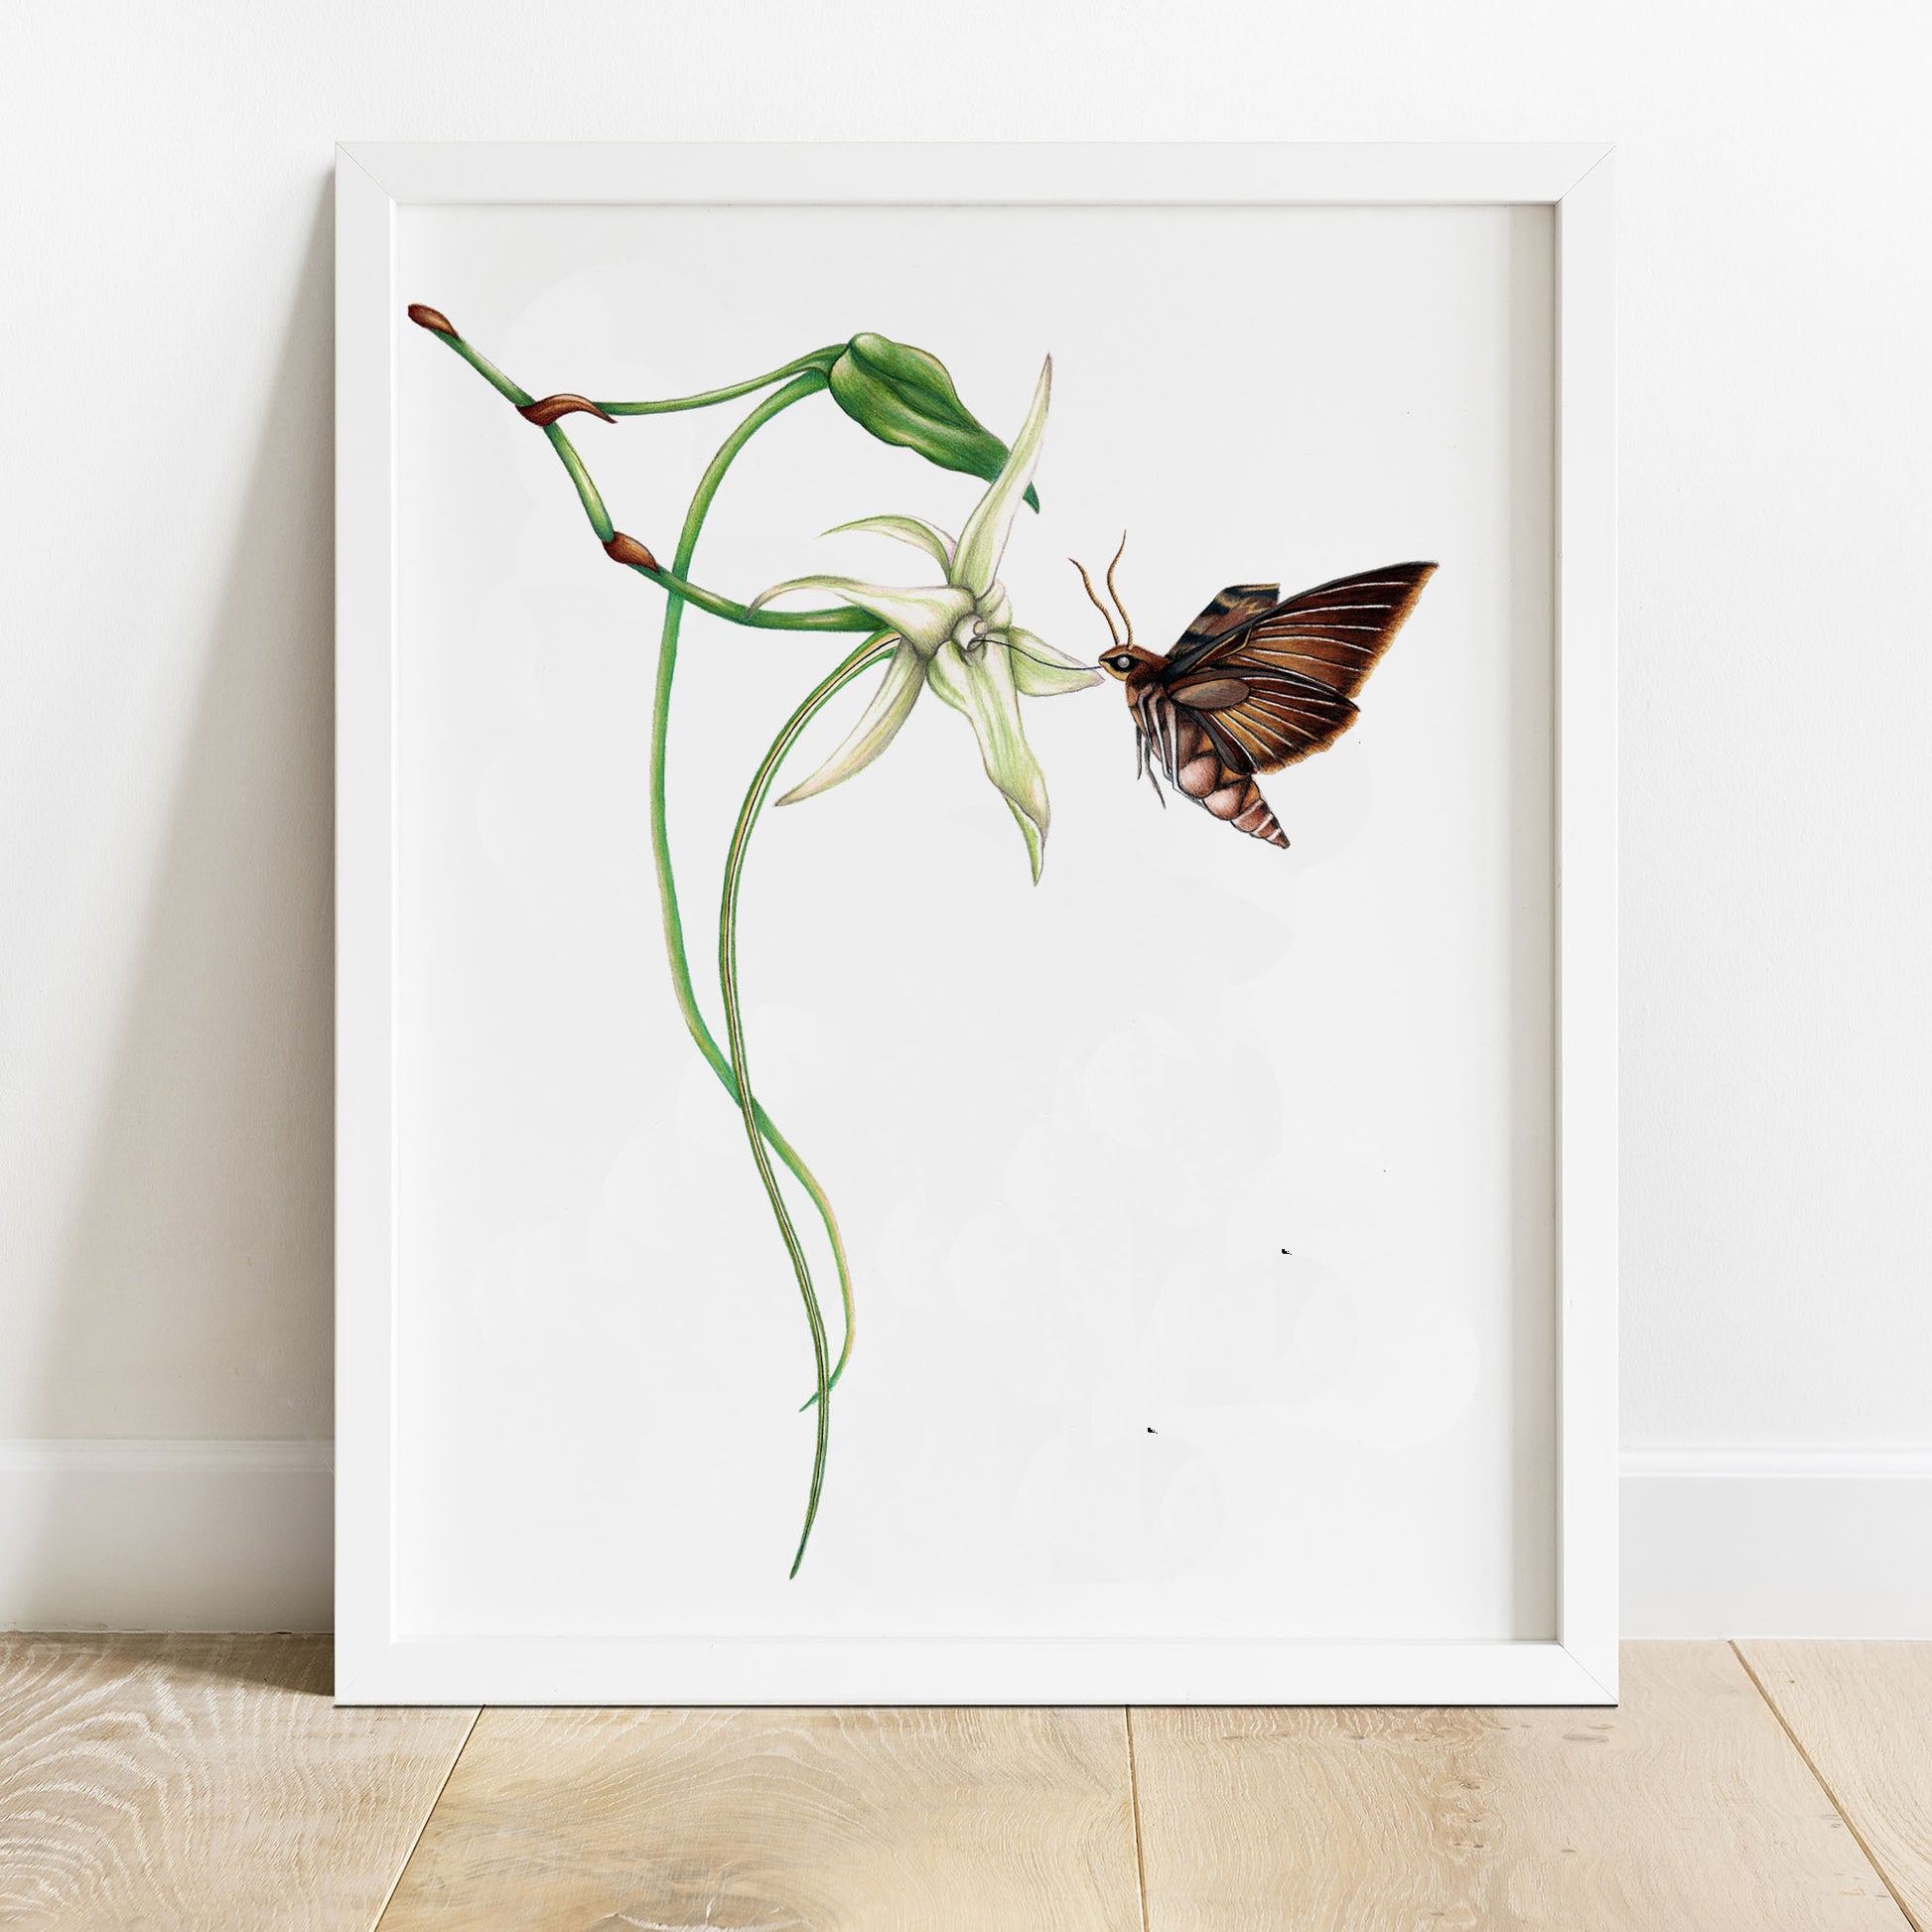 Hand drawn pencil art of Darwin's hawk moth with comet orchid by Rachel Diaz-Bastin. Prints available.